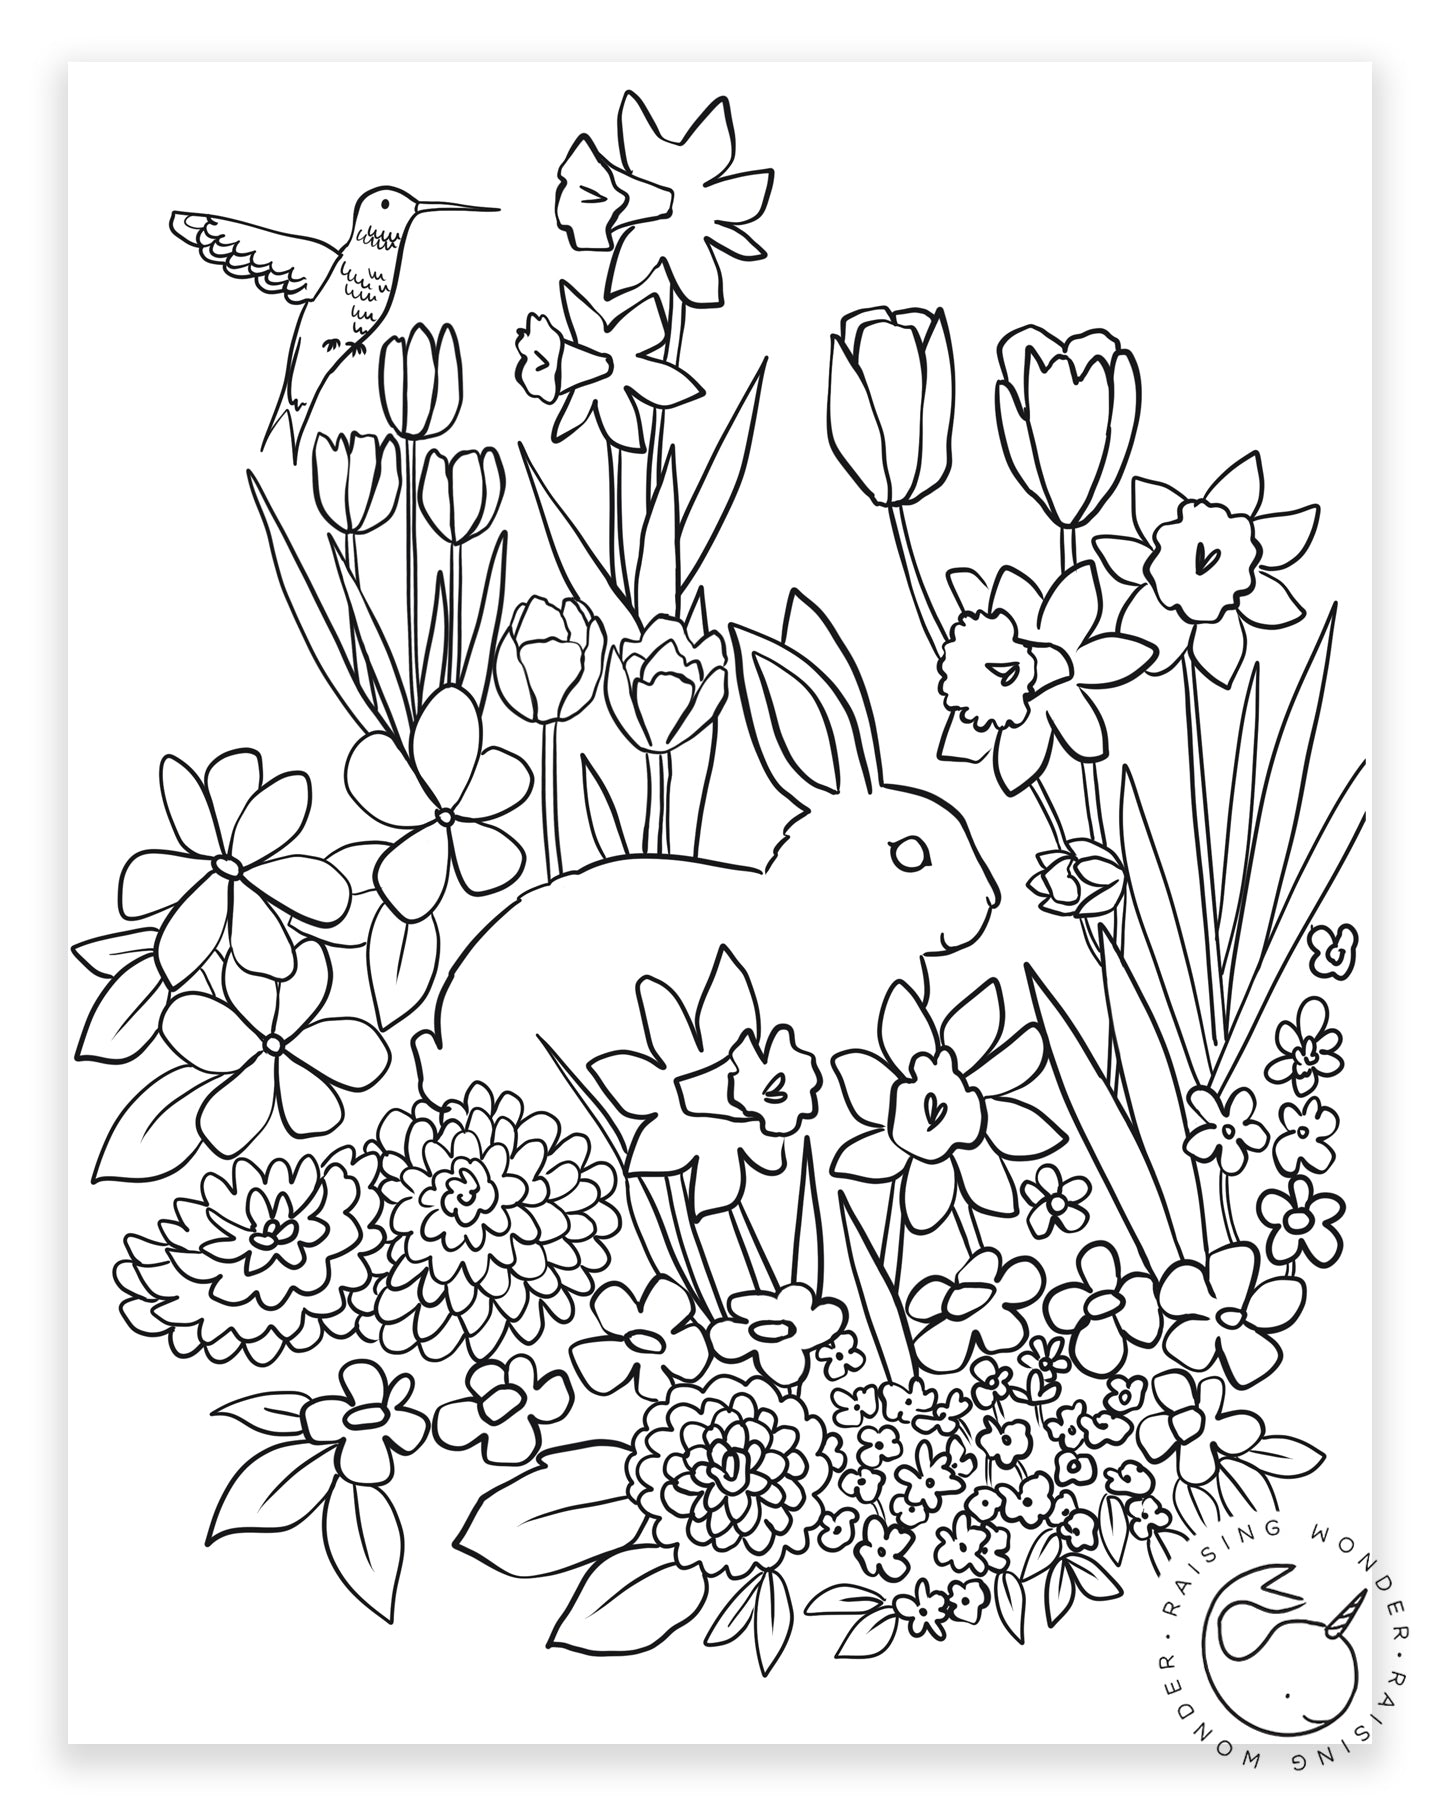 Art for Adults: A Collection of Flowers and Patterns to Color a